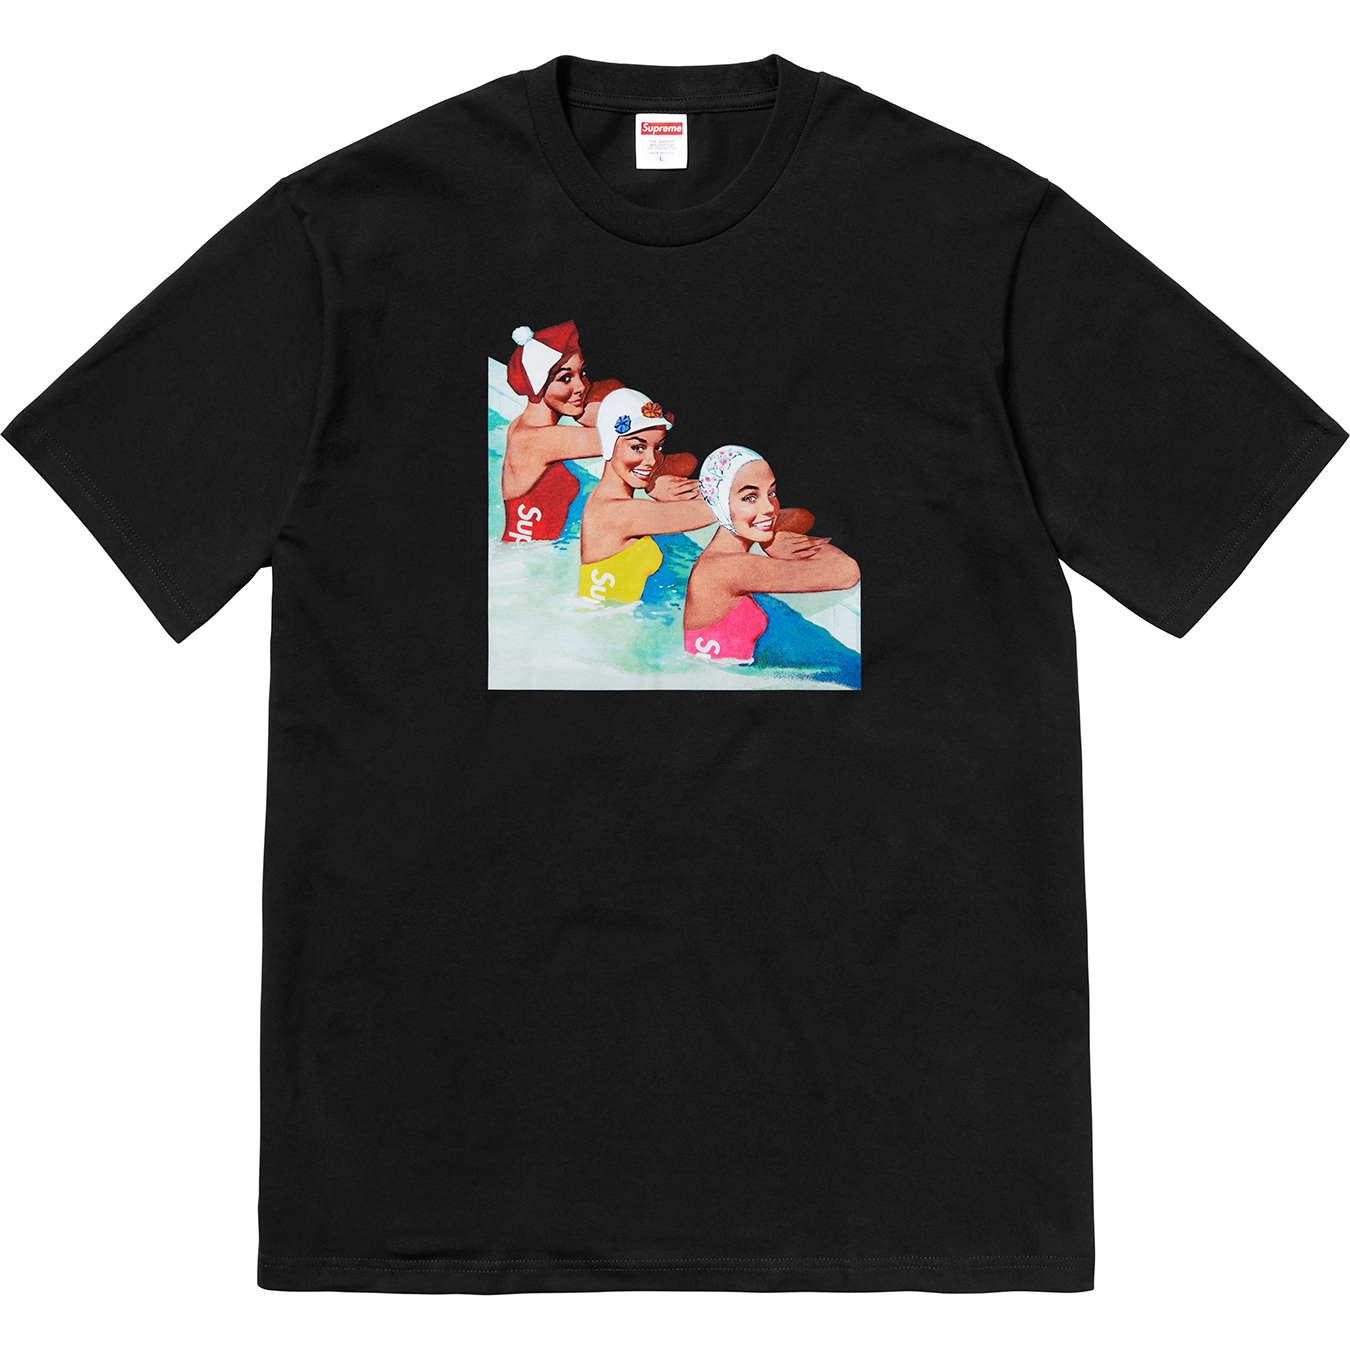 L】 Supreme Summer Tees Swimmers Tee